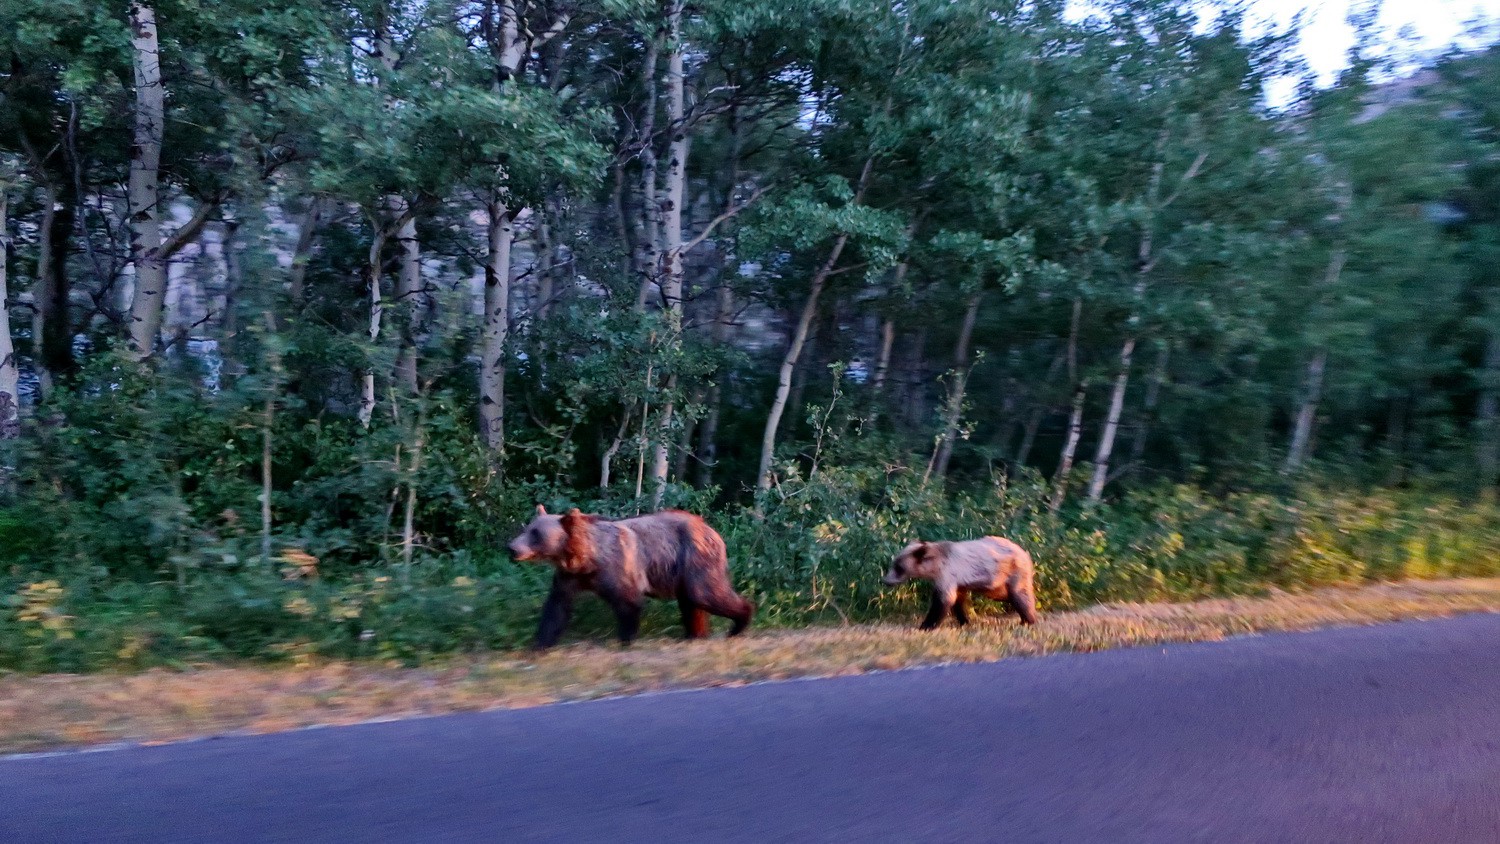 Another (female) Bear with cub walking on the street at dawn